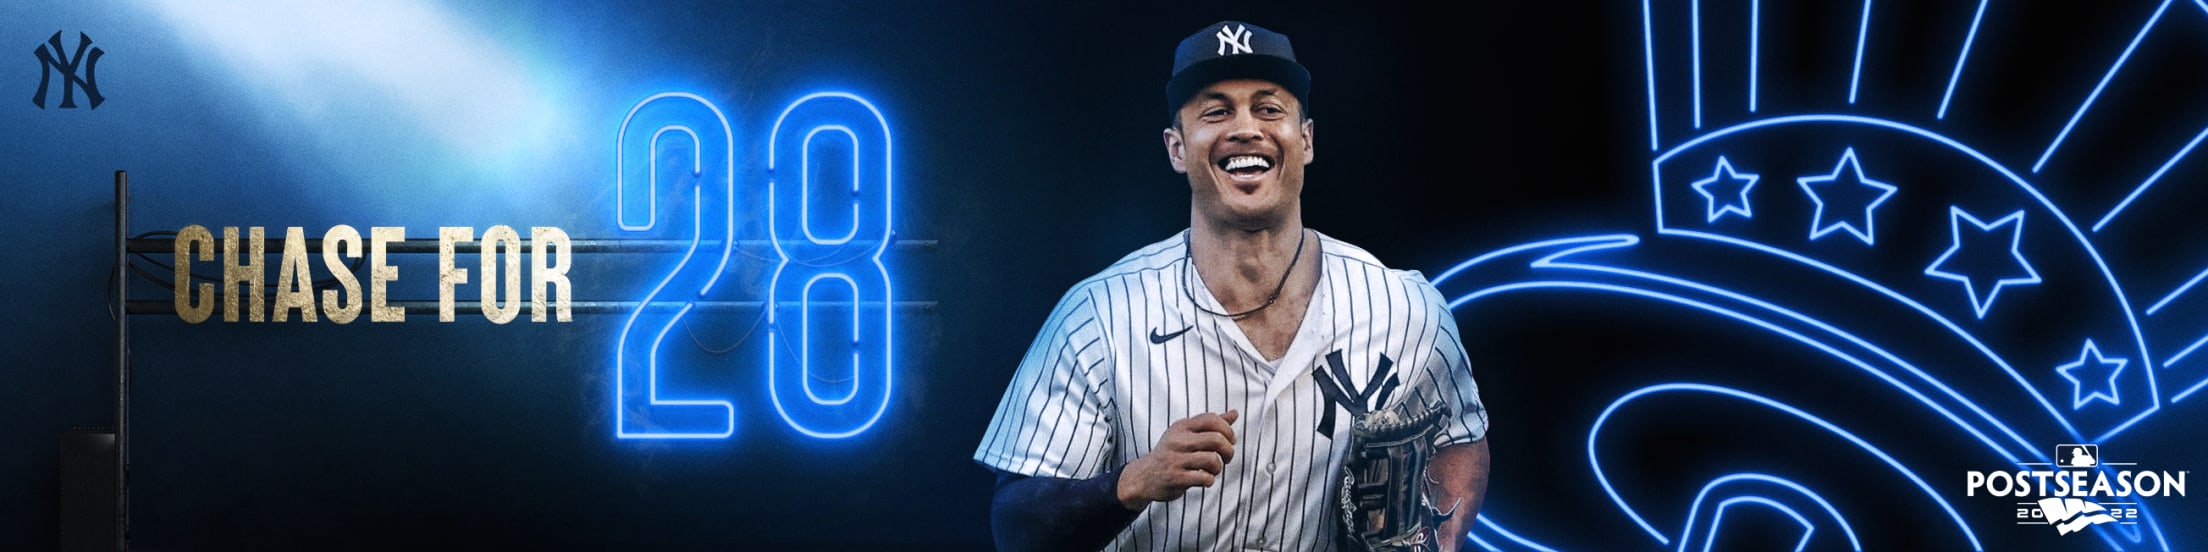 Yankees Chase for #28